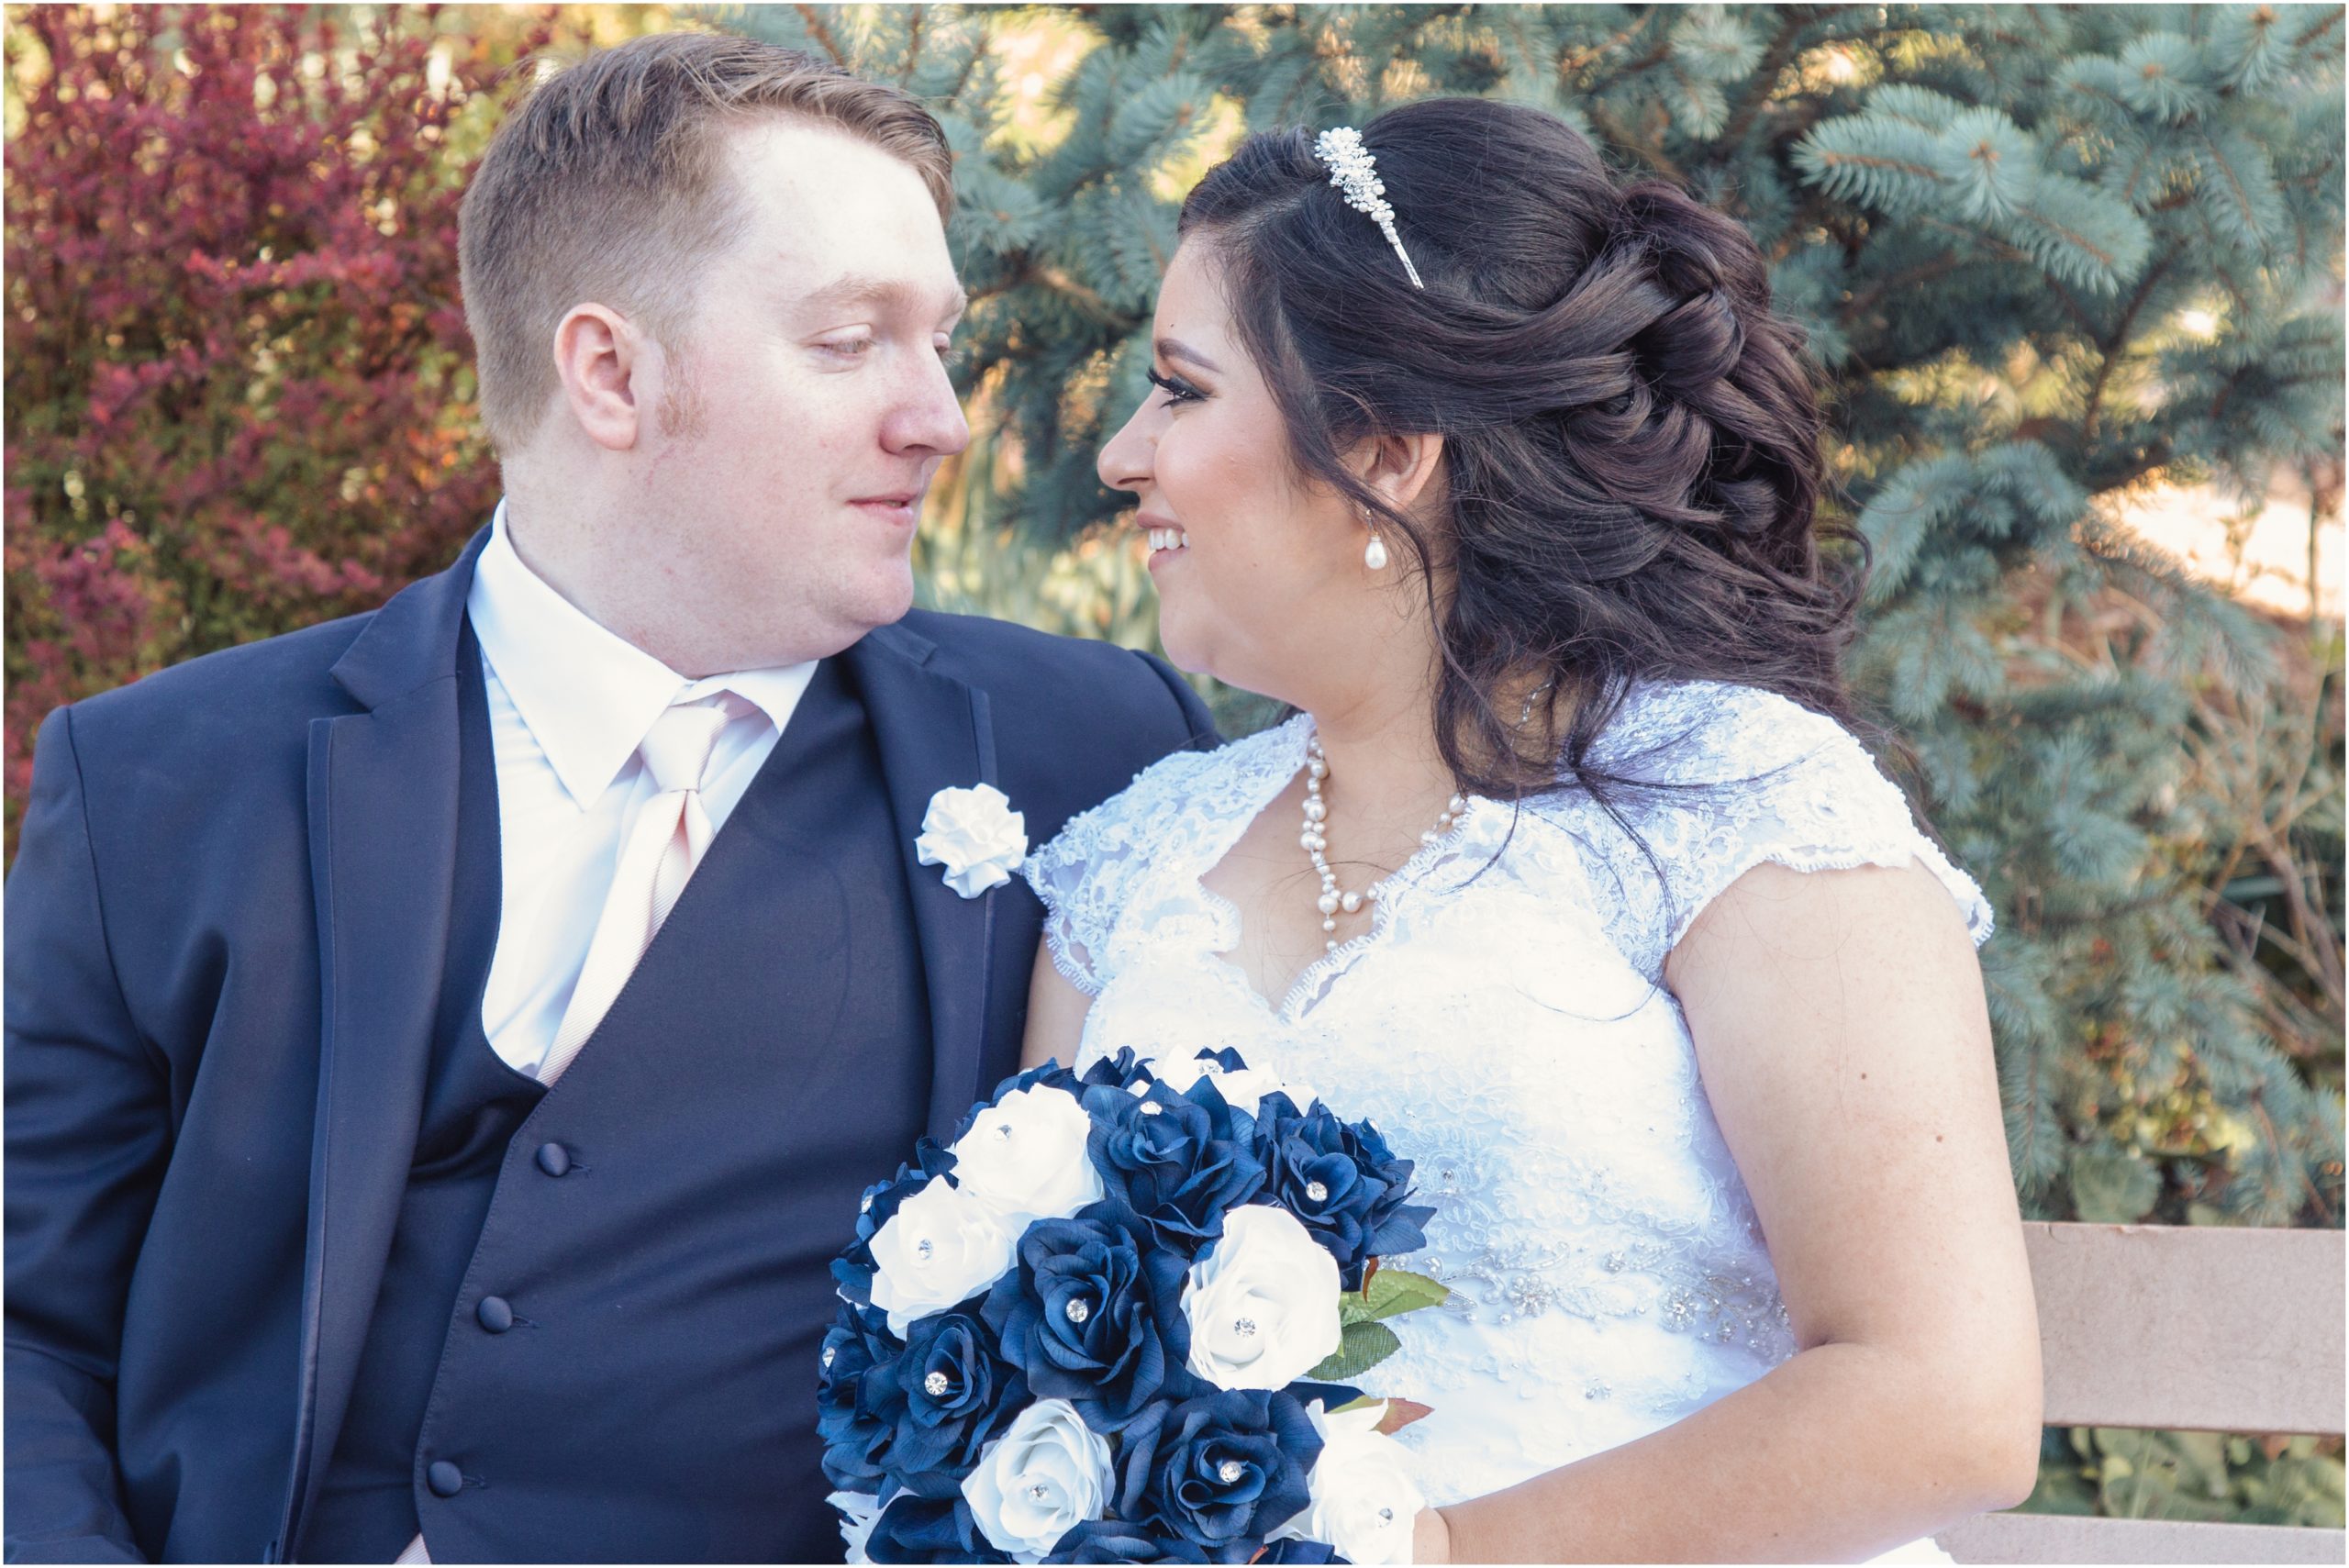 Tyler and Linda were married at the Immaculate Heart Catholic Church.